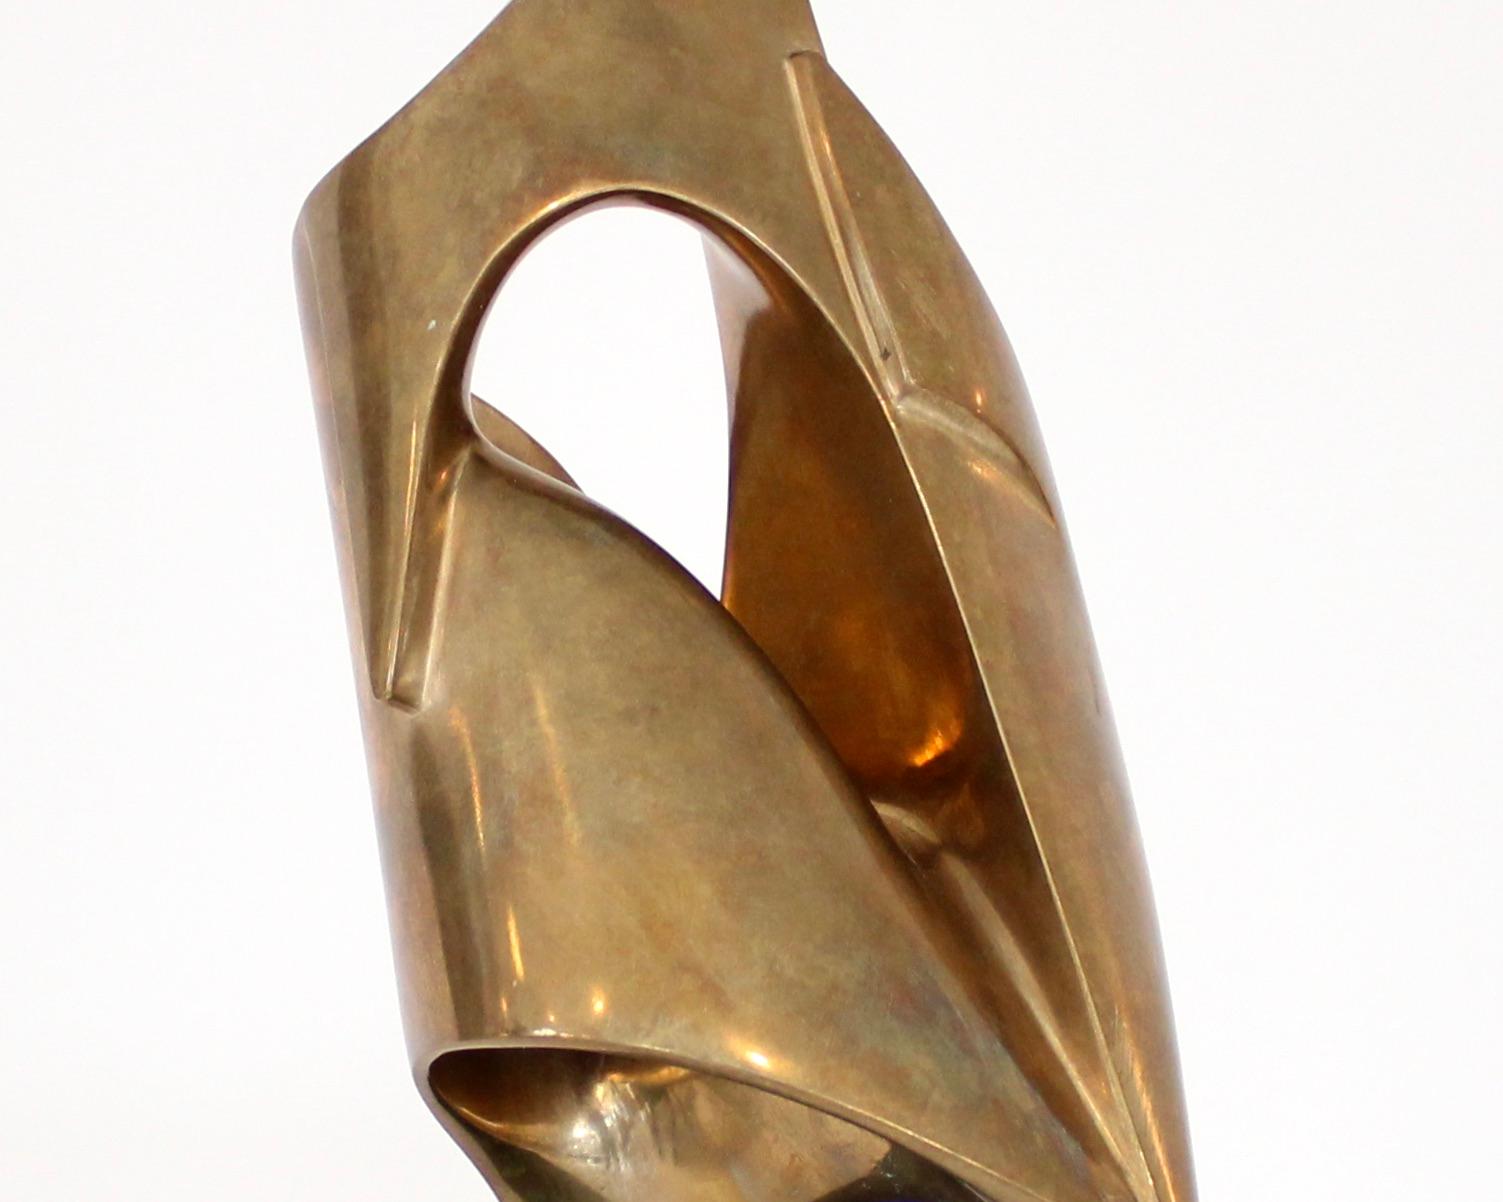 Abstract Bronze Sculpture Attributed to Artist Alicia Penalba  2